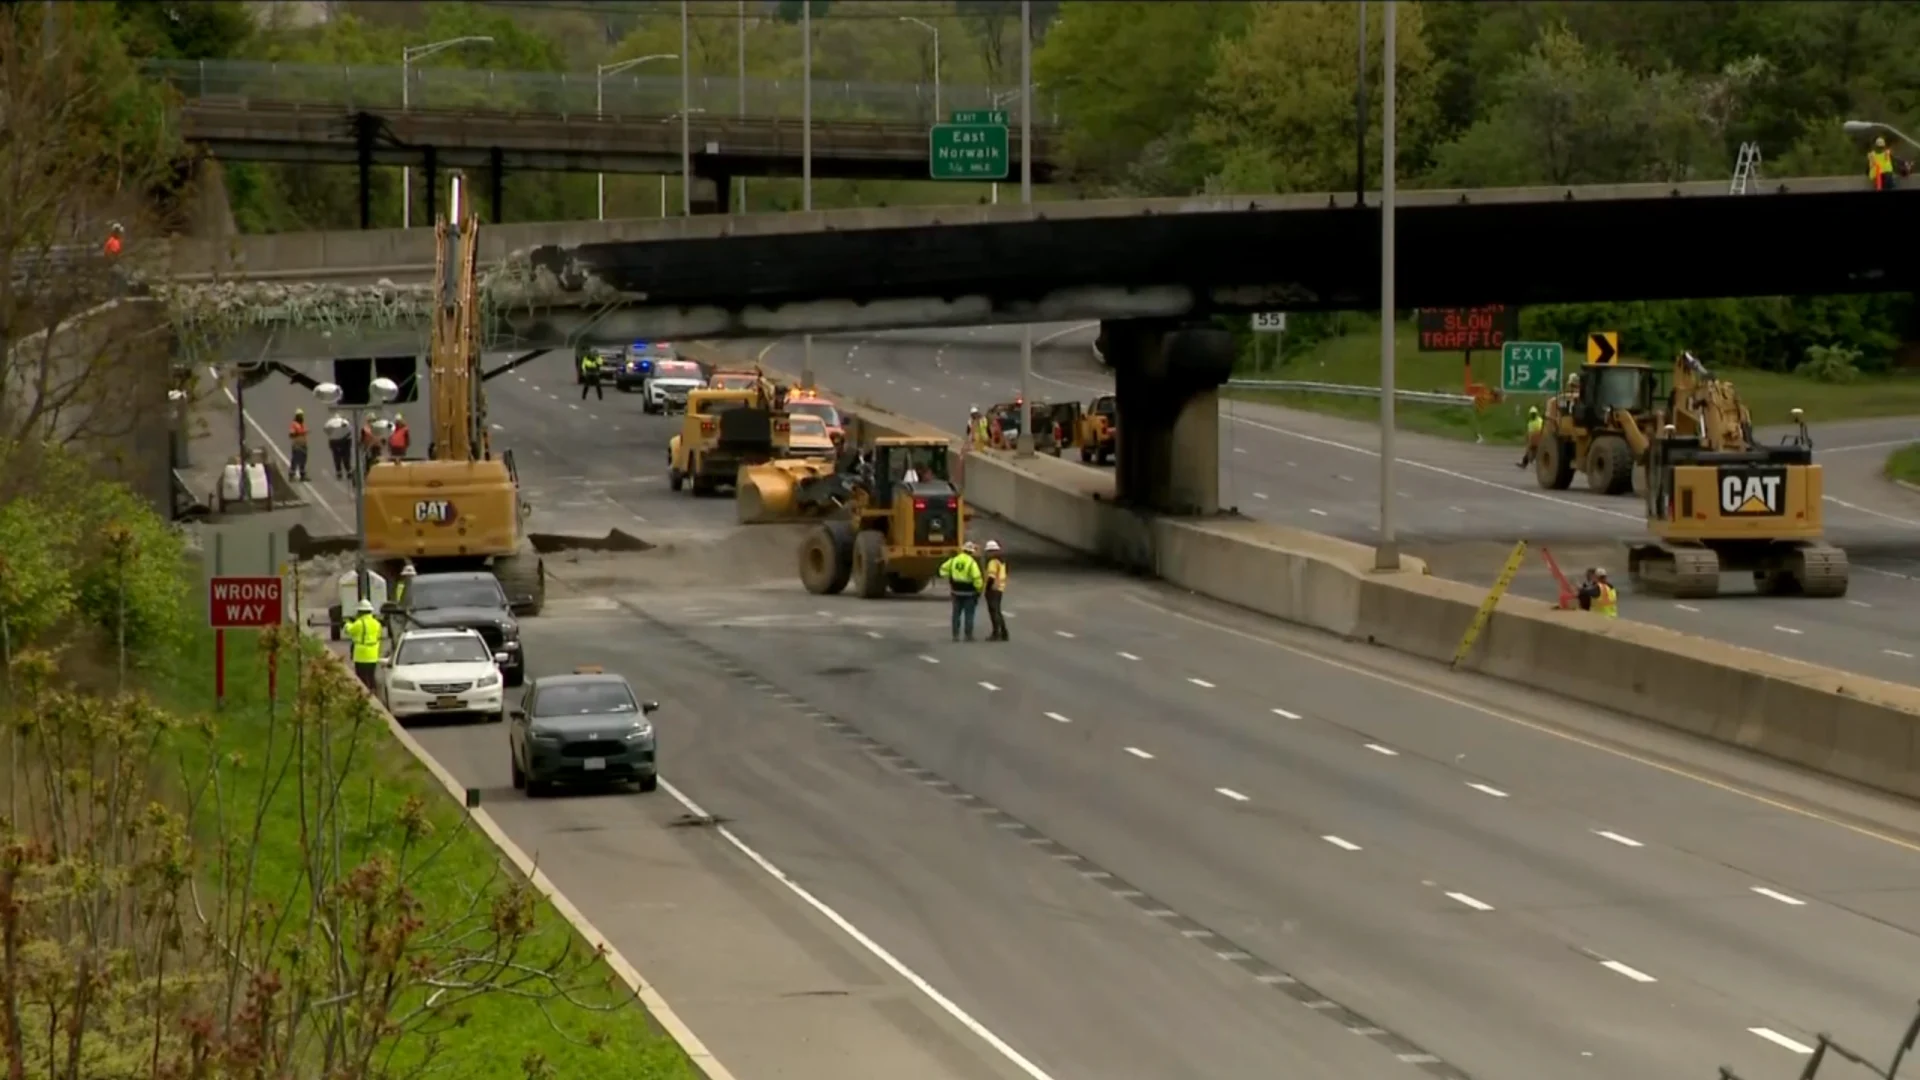 Bridge over section of I-95 demolished due to damage from truck fire